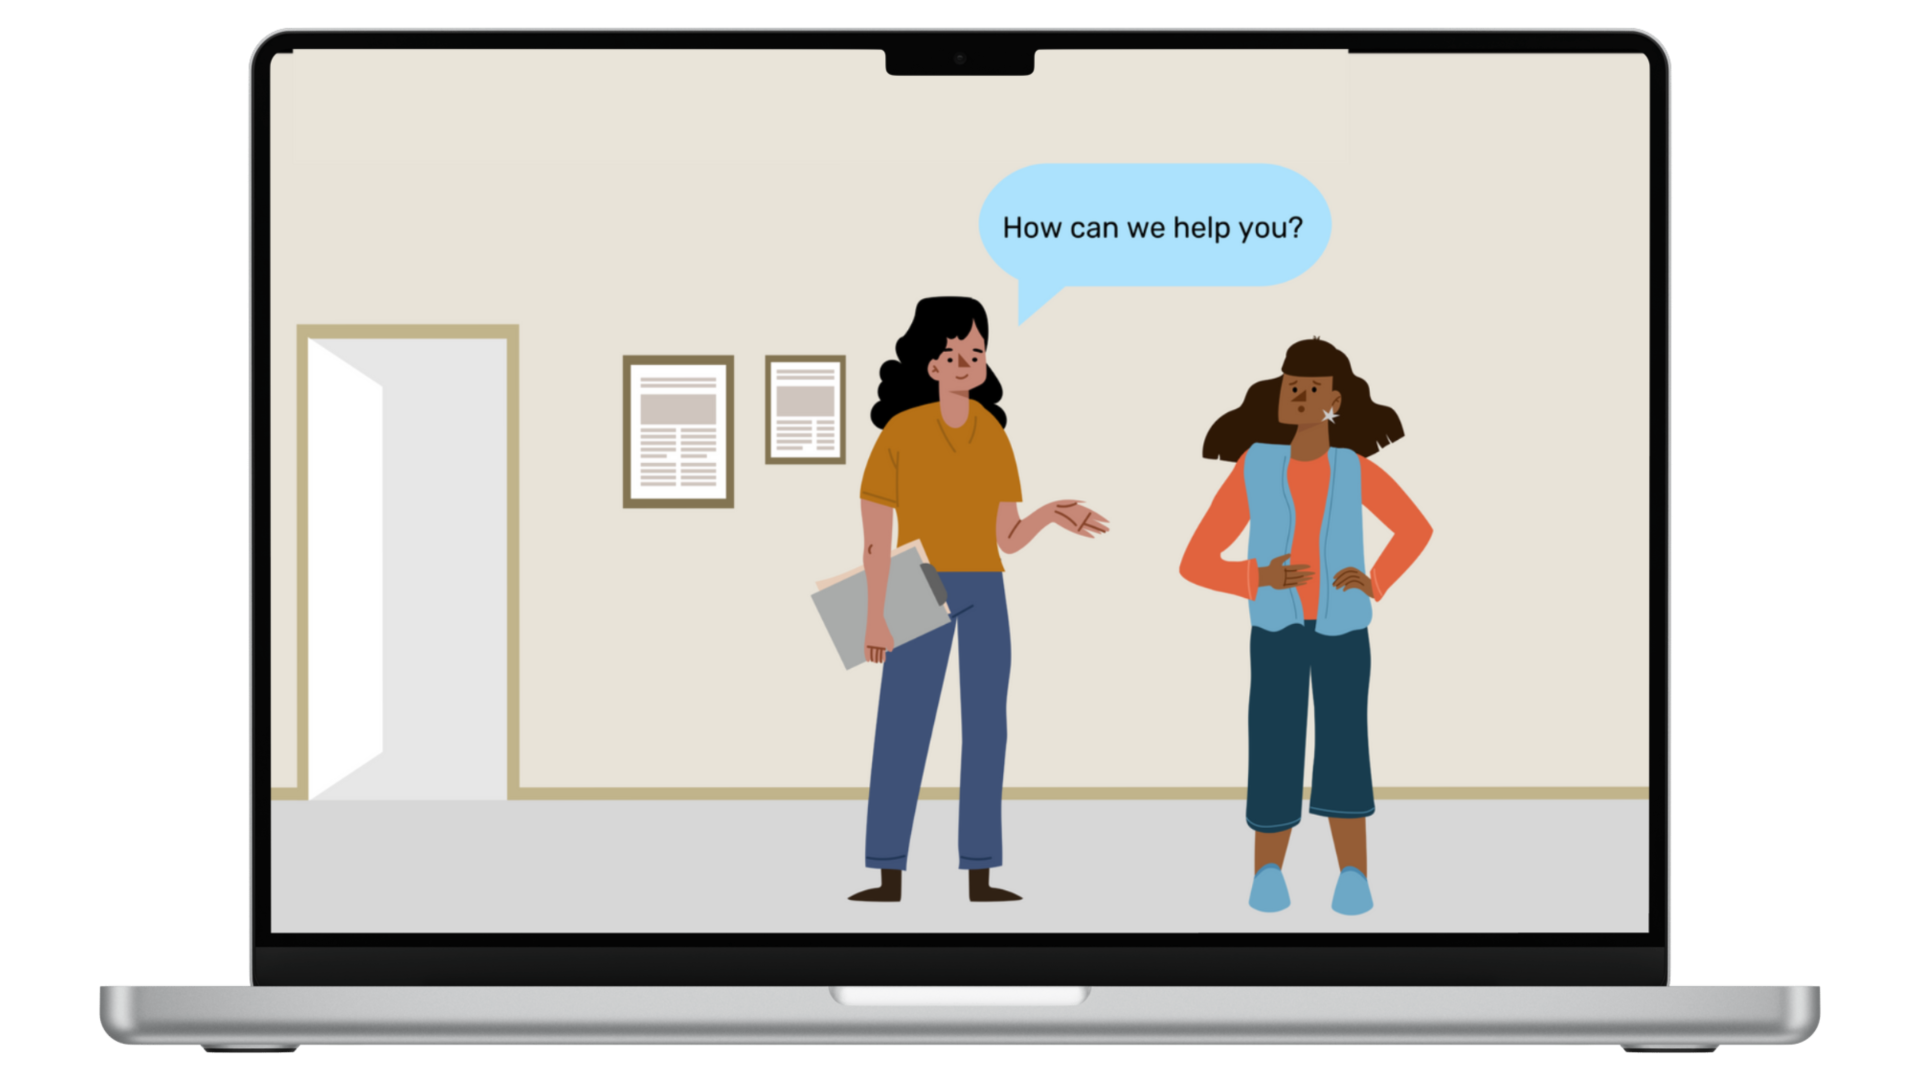 A laptop with an illustration on the screen showing two people of colour speaking to each other. The one on the left is asking, "How can we help you?" to the person on the right, who is holding her hand to her abdomen.